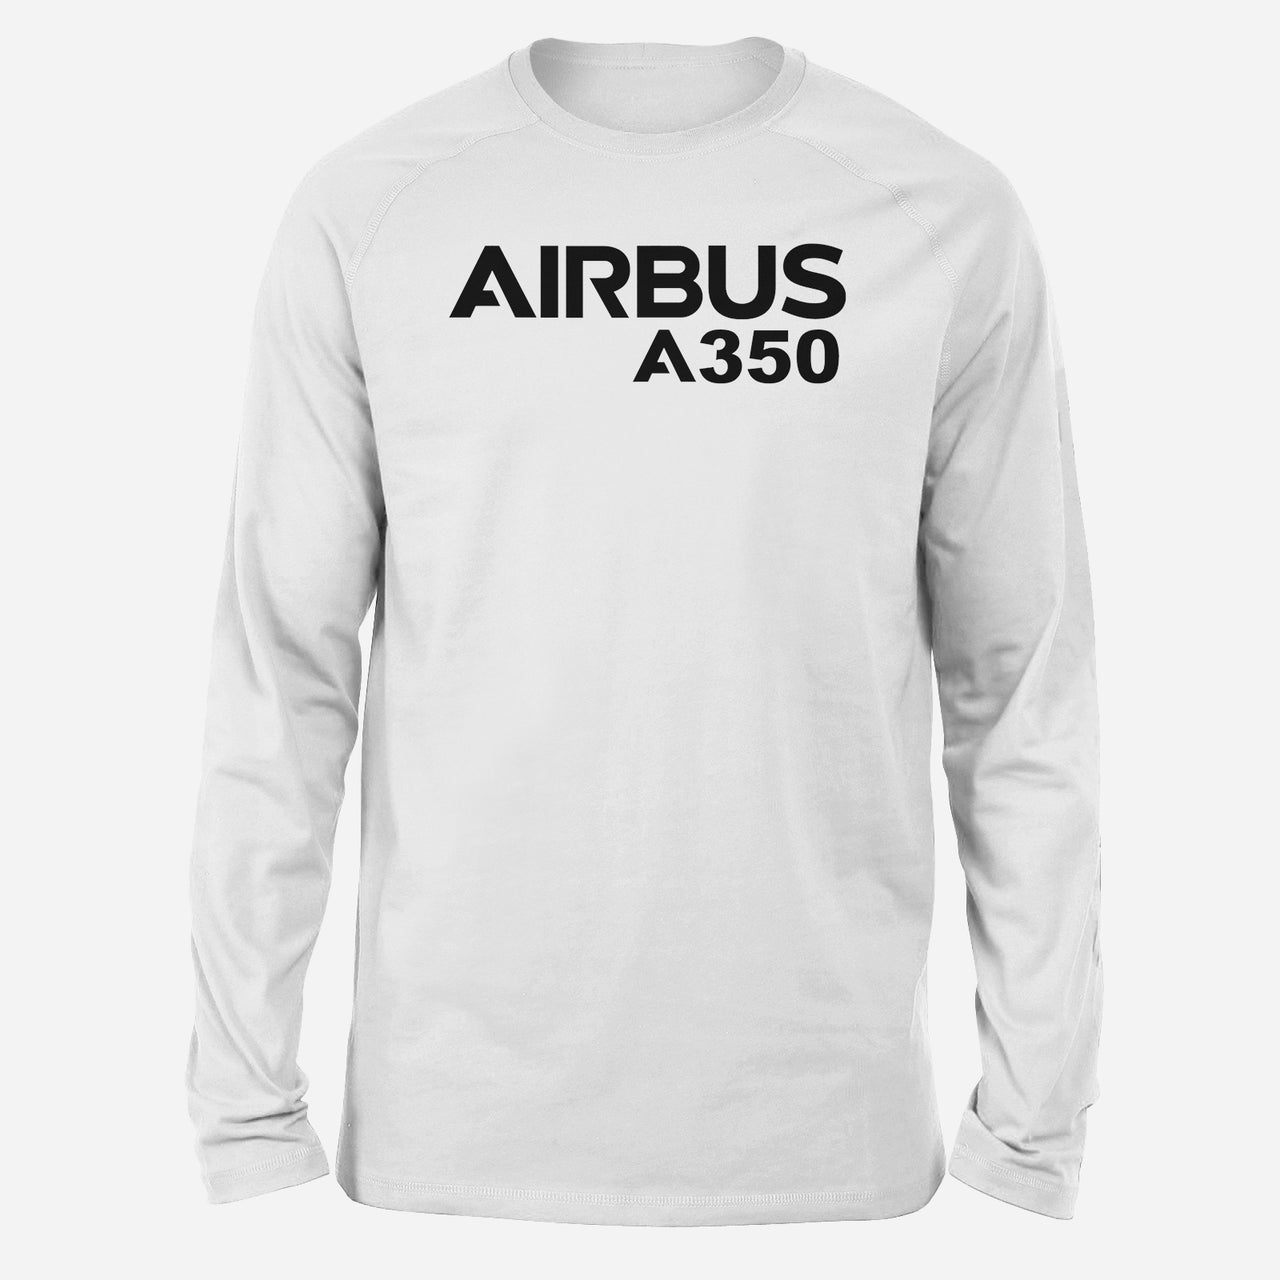 Airbus A350 & Text Designed Long-Sleeve T-Shirts